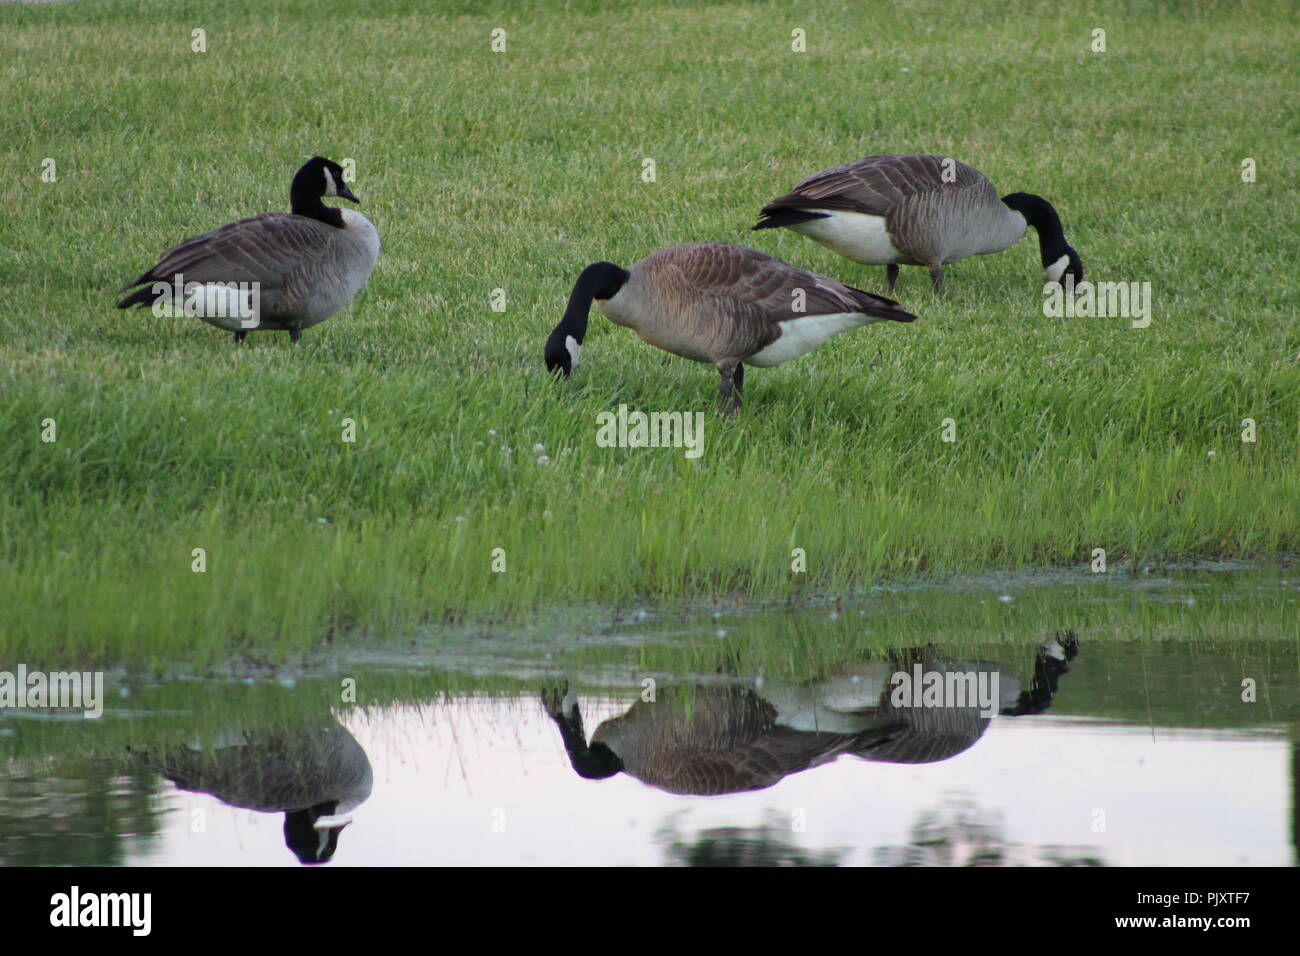 three geese eating in a field by a pond with their reflection in the water Stock Photo